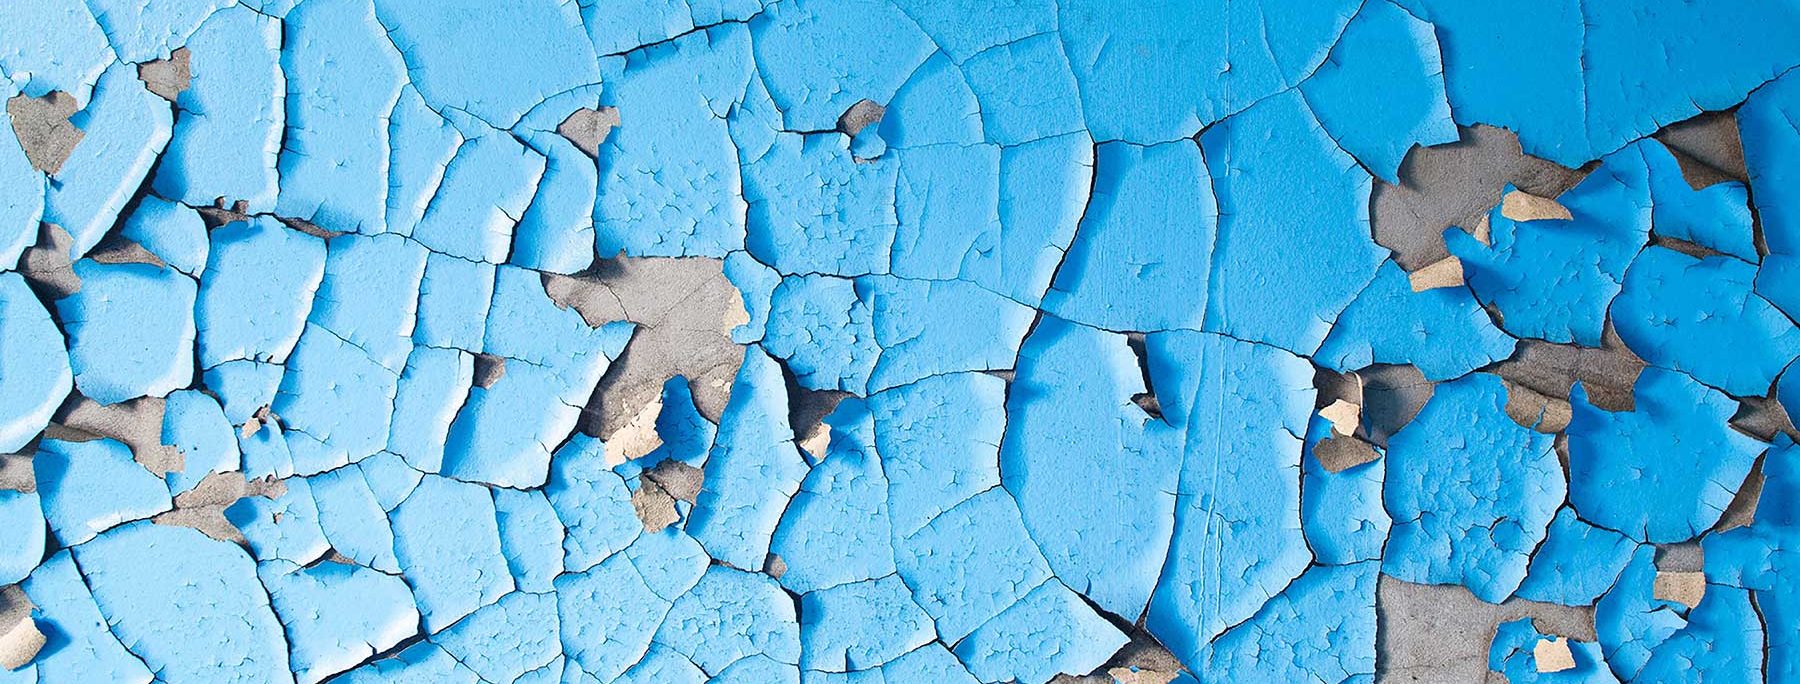 chipped paint on pool wall